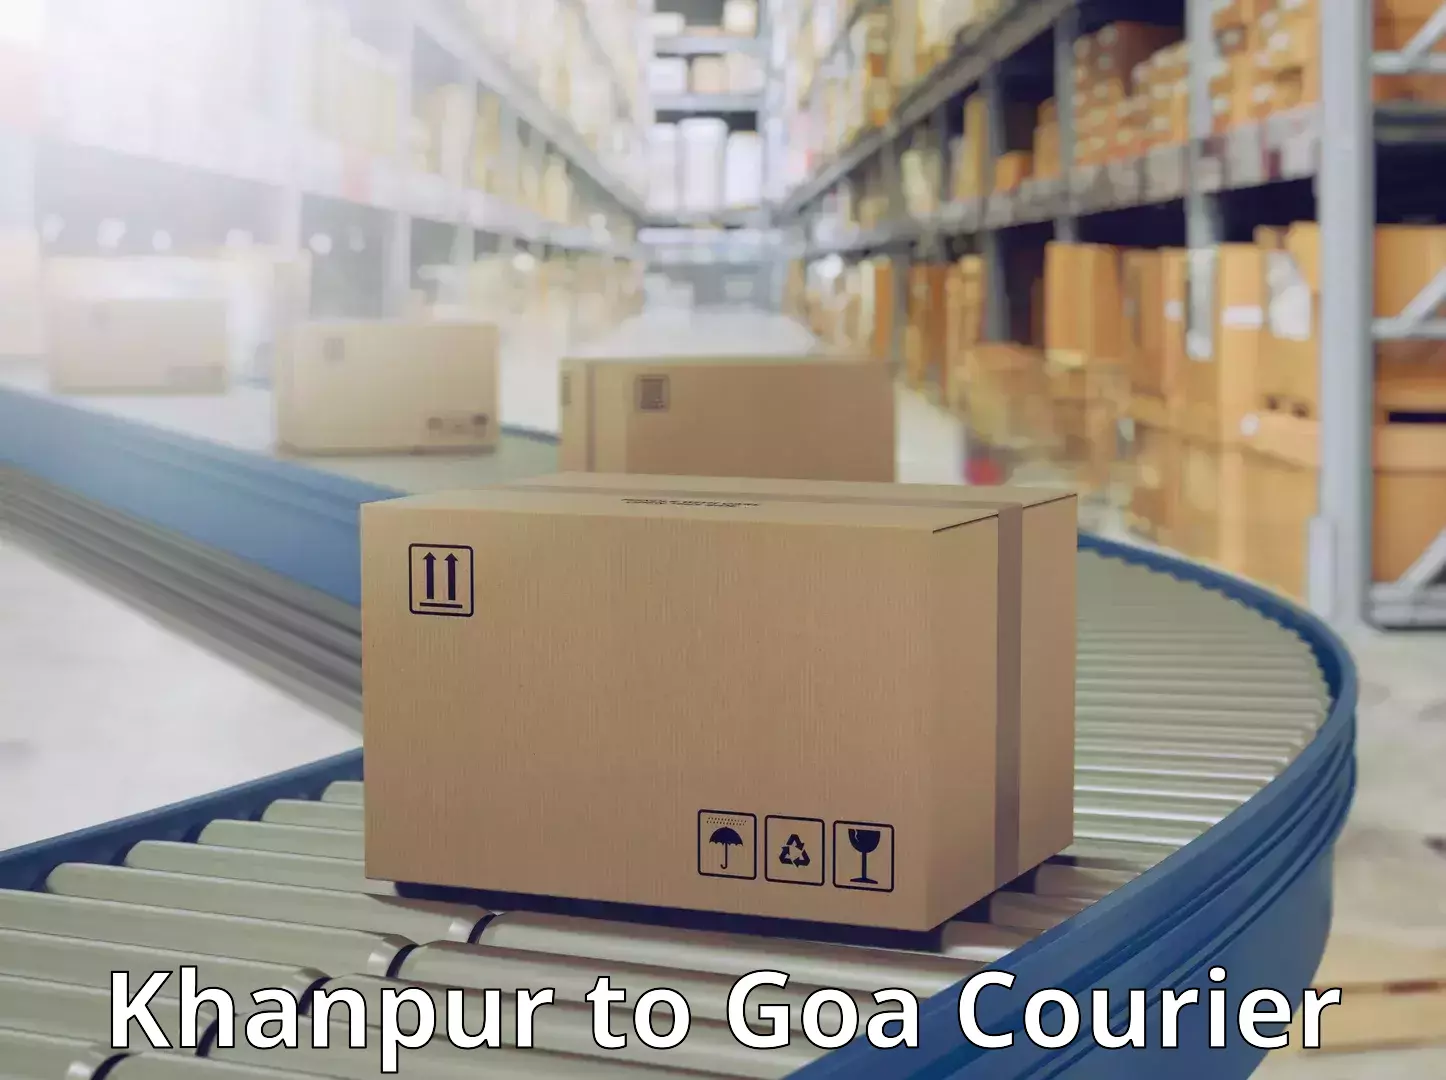 Online package tracking Khanpur to Goa